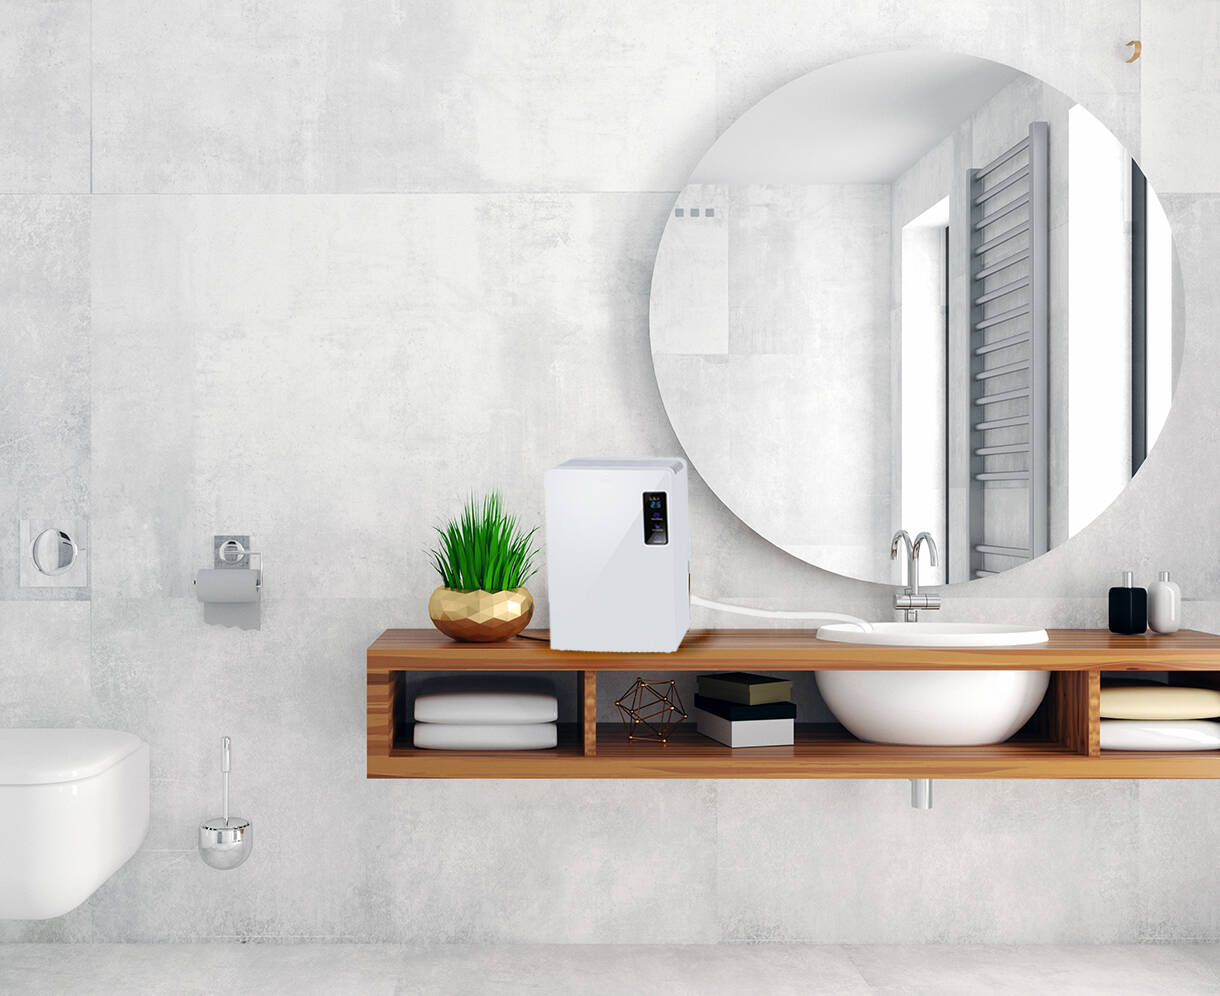 Modern bathroom interior in loft style chest of drawers